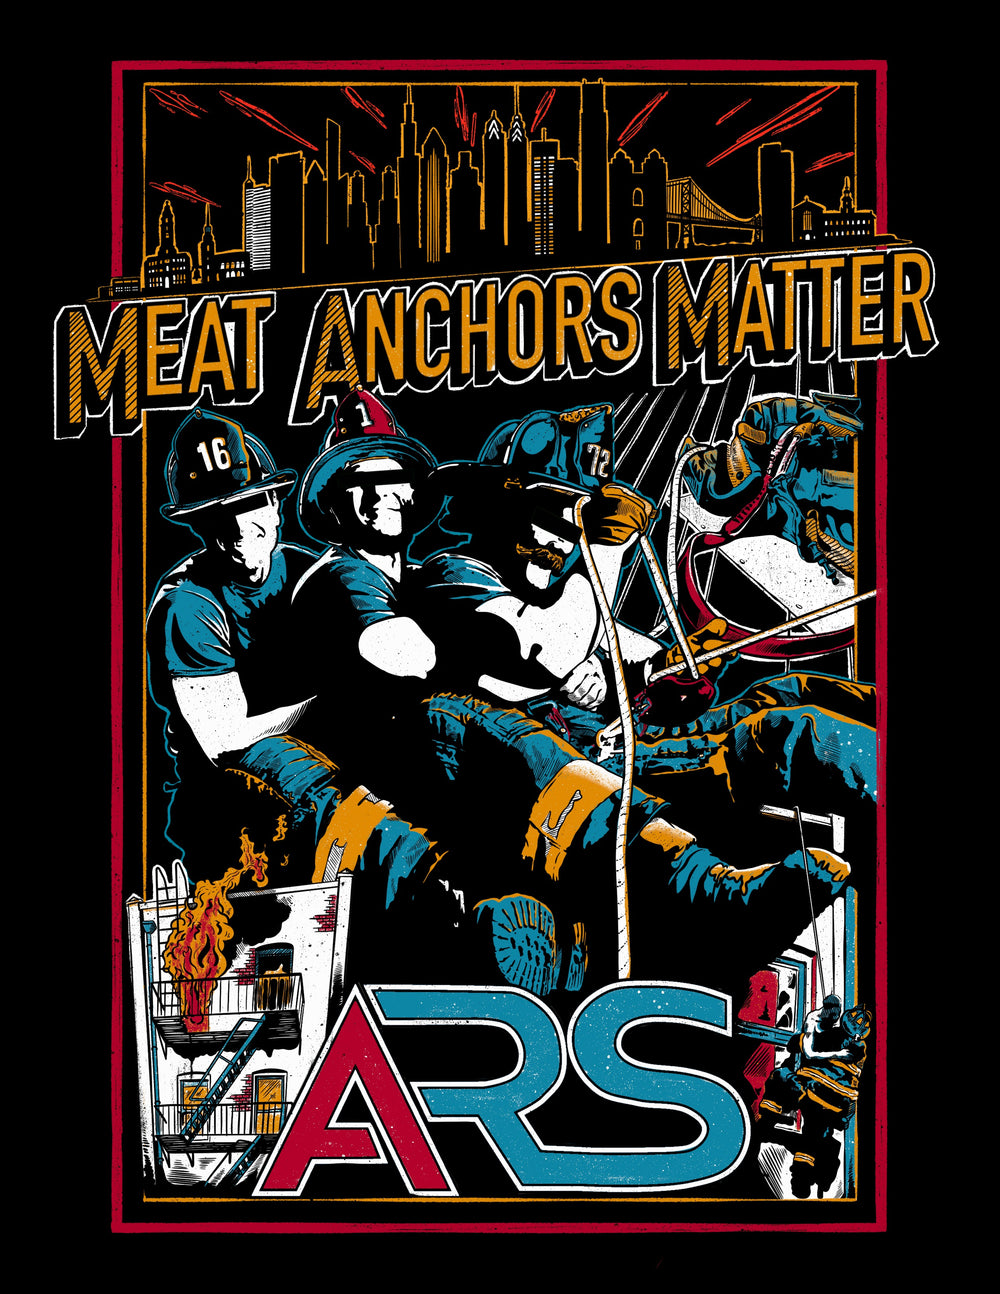 LIMITED EDITION! "Meat Anchors Matter" T-Shirt